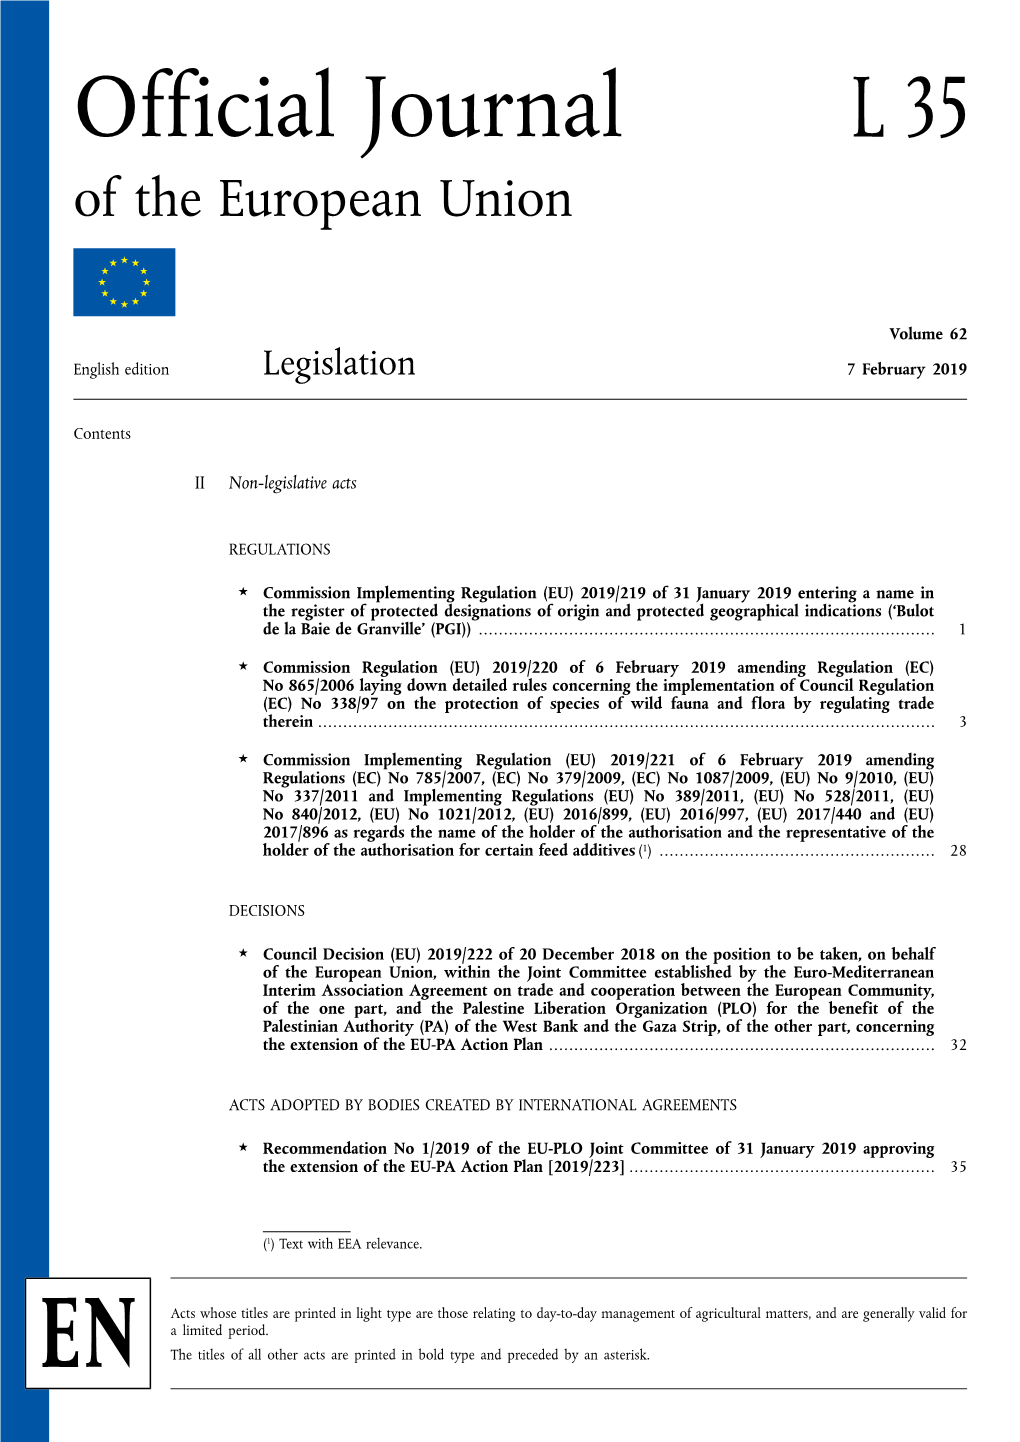 Official Journal L 35 of the European Union